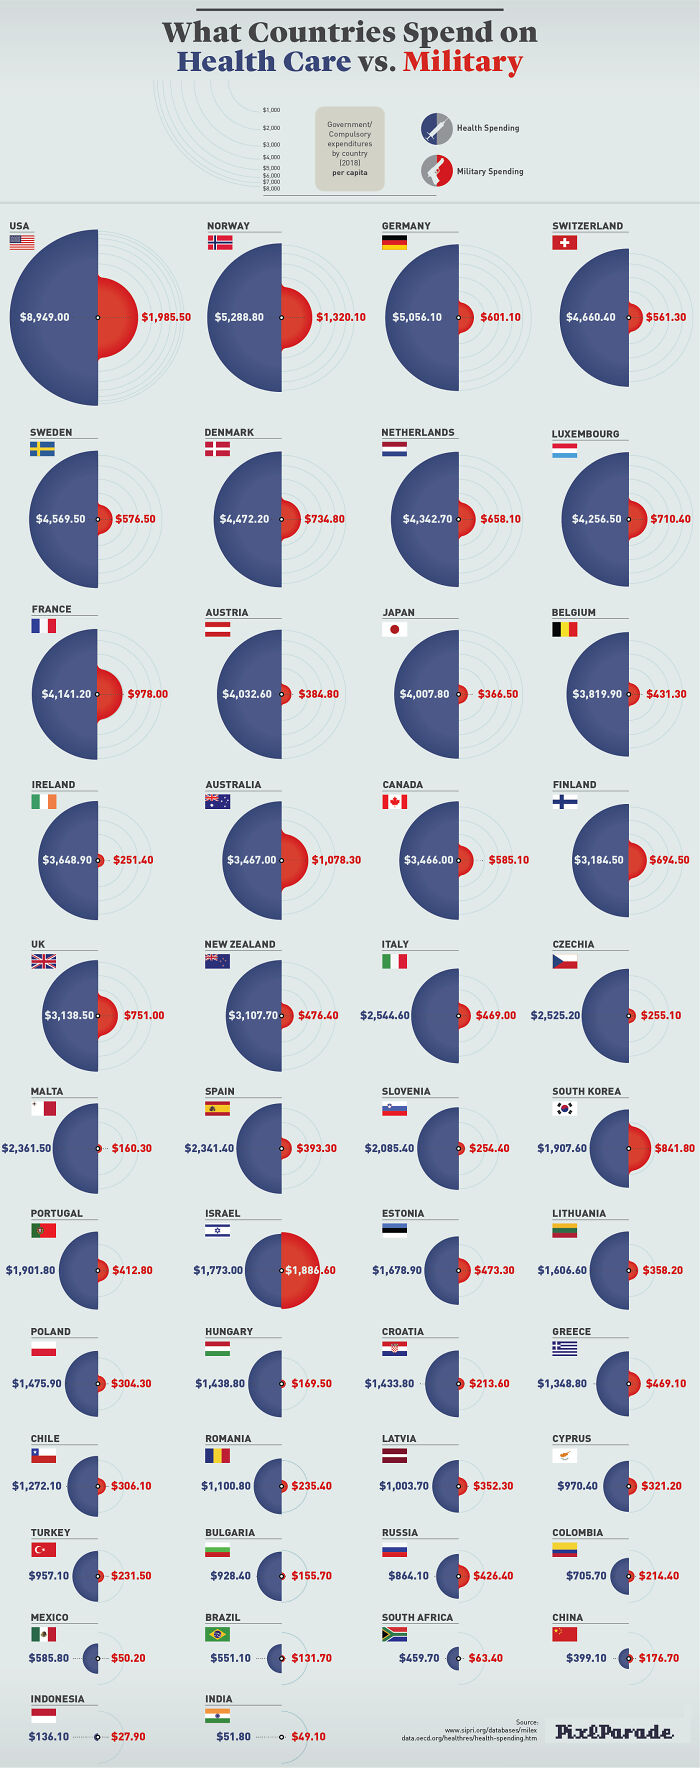 What Countries Spend On Healthcare vs. Military Around The World